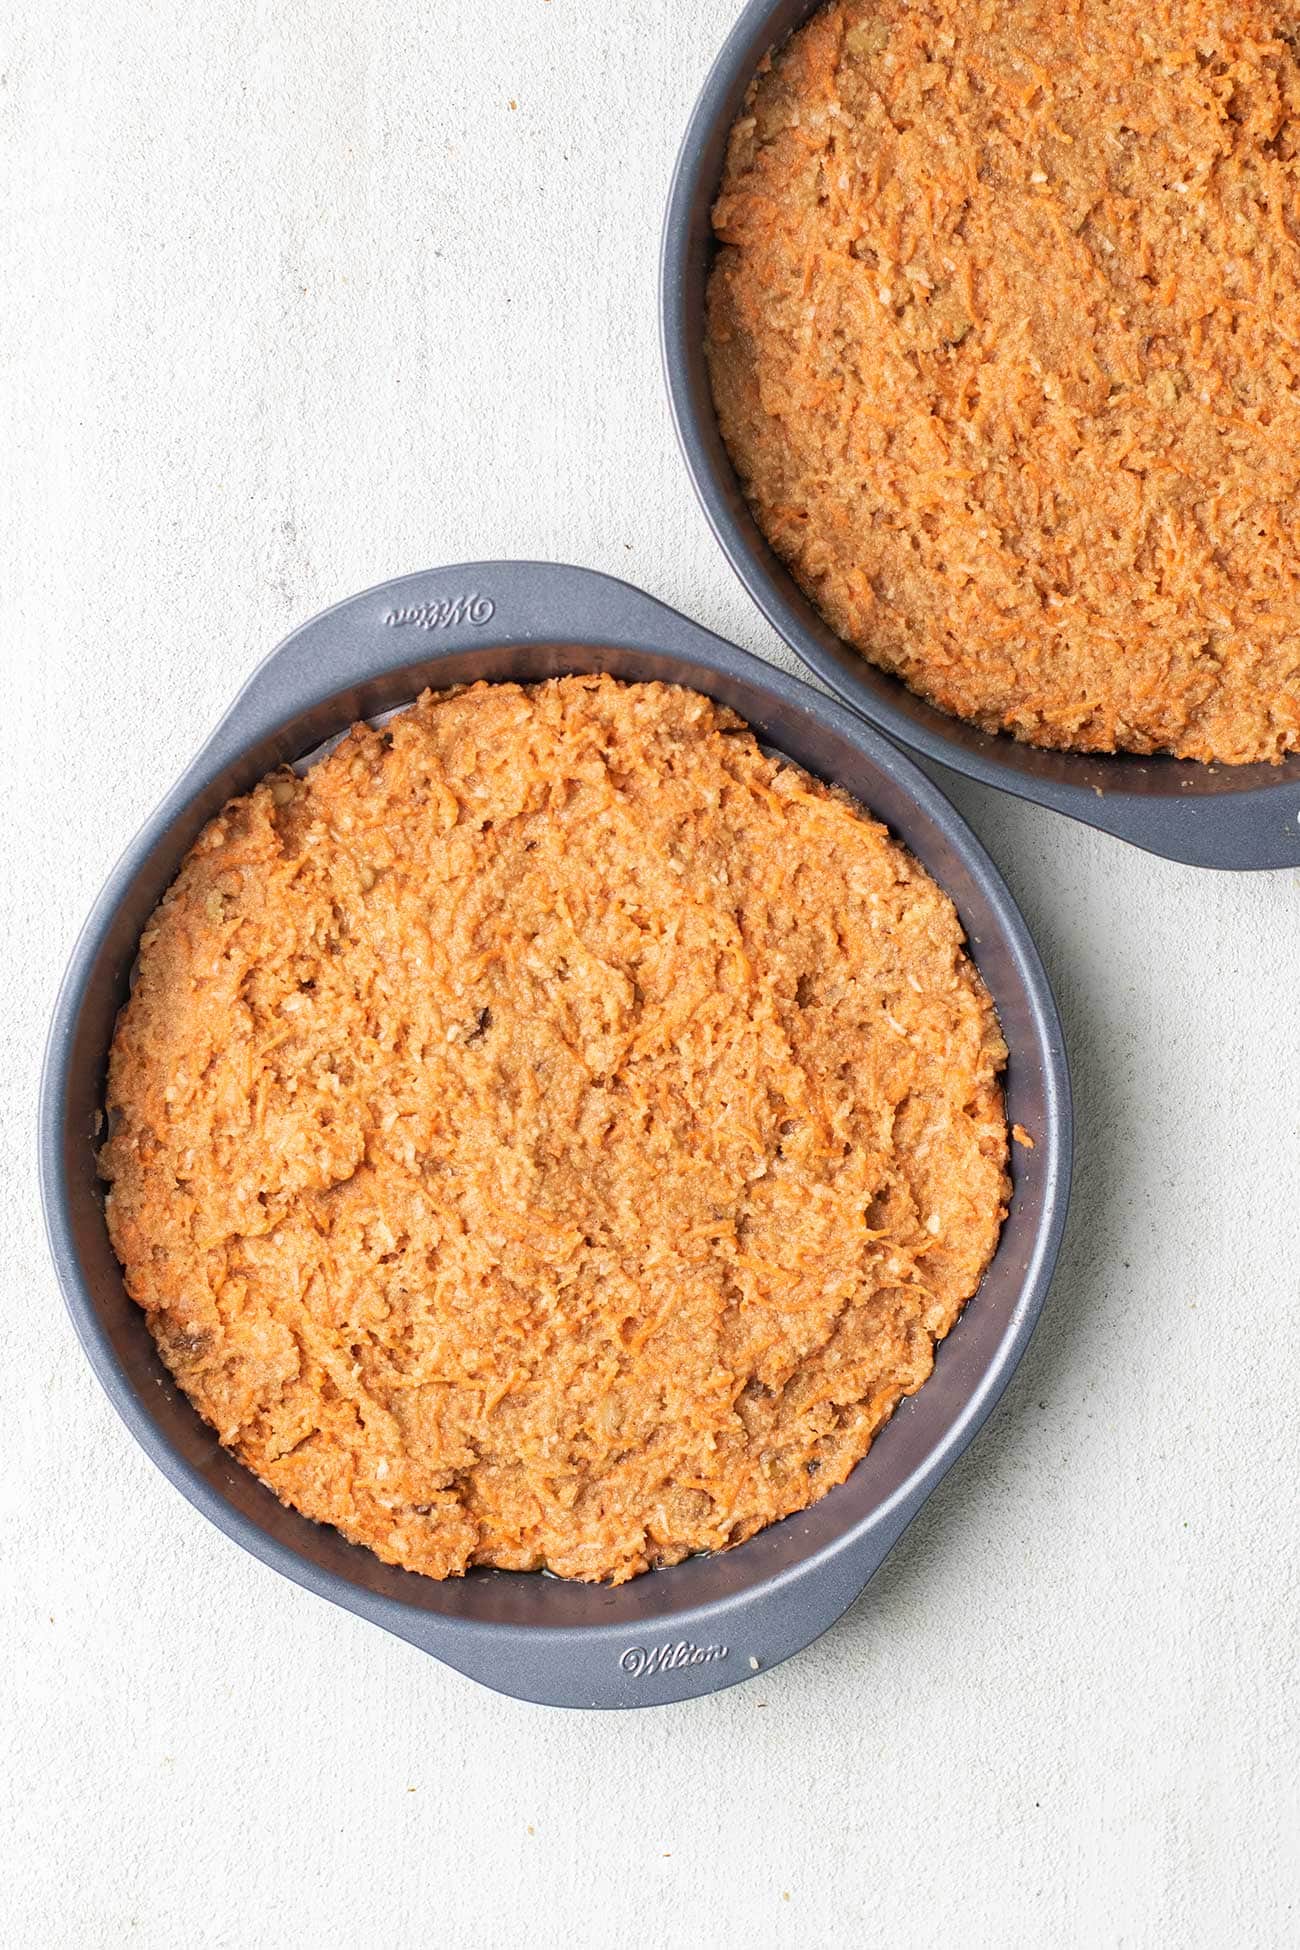 The carrot cake batter spread into two layer cake pans.